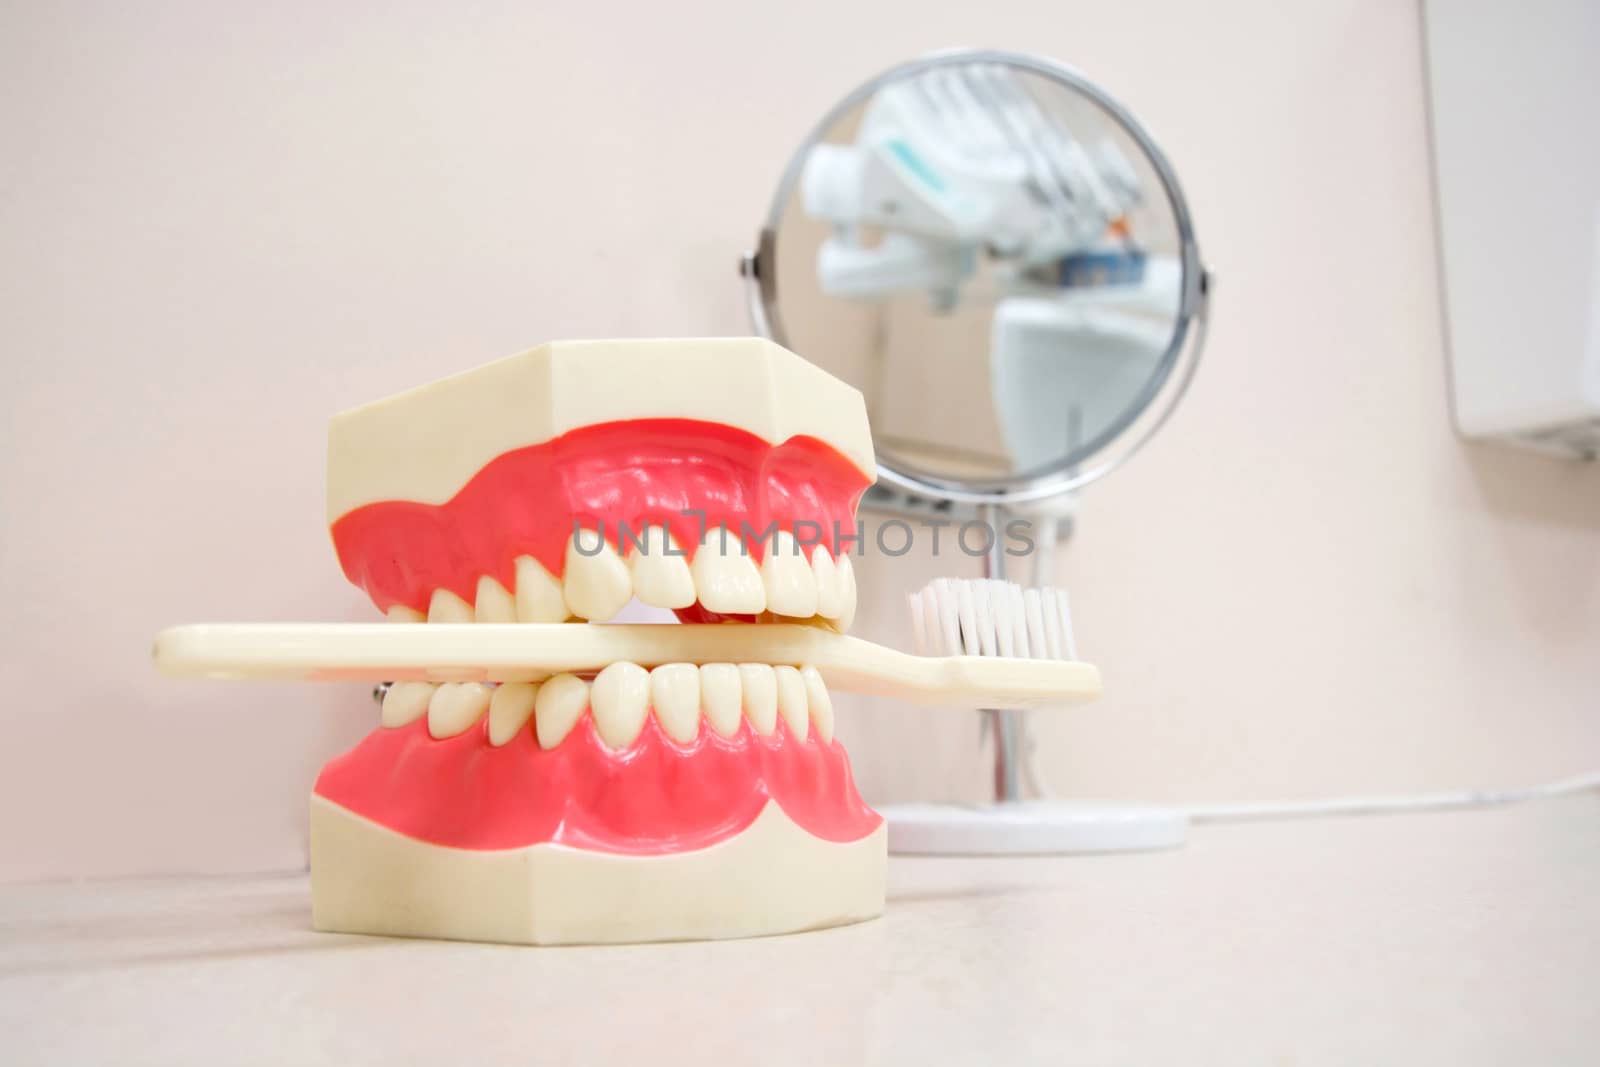 Artificial jaw and toothbrush in dental office. Dental Hygiene and Health conceptual image.